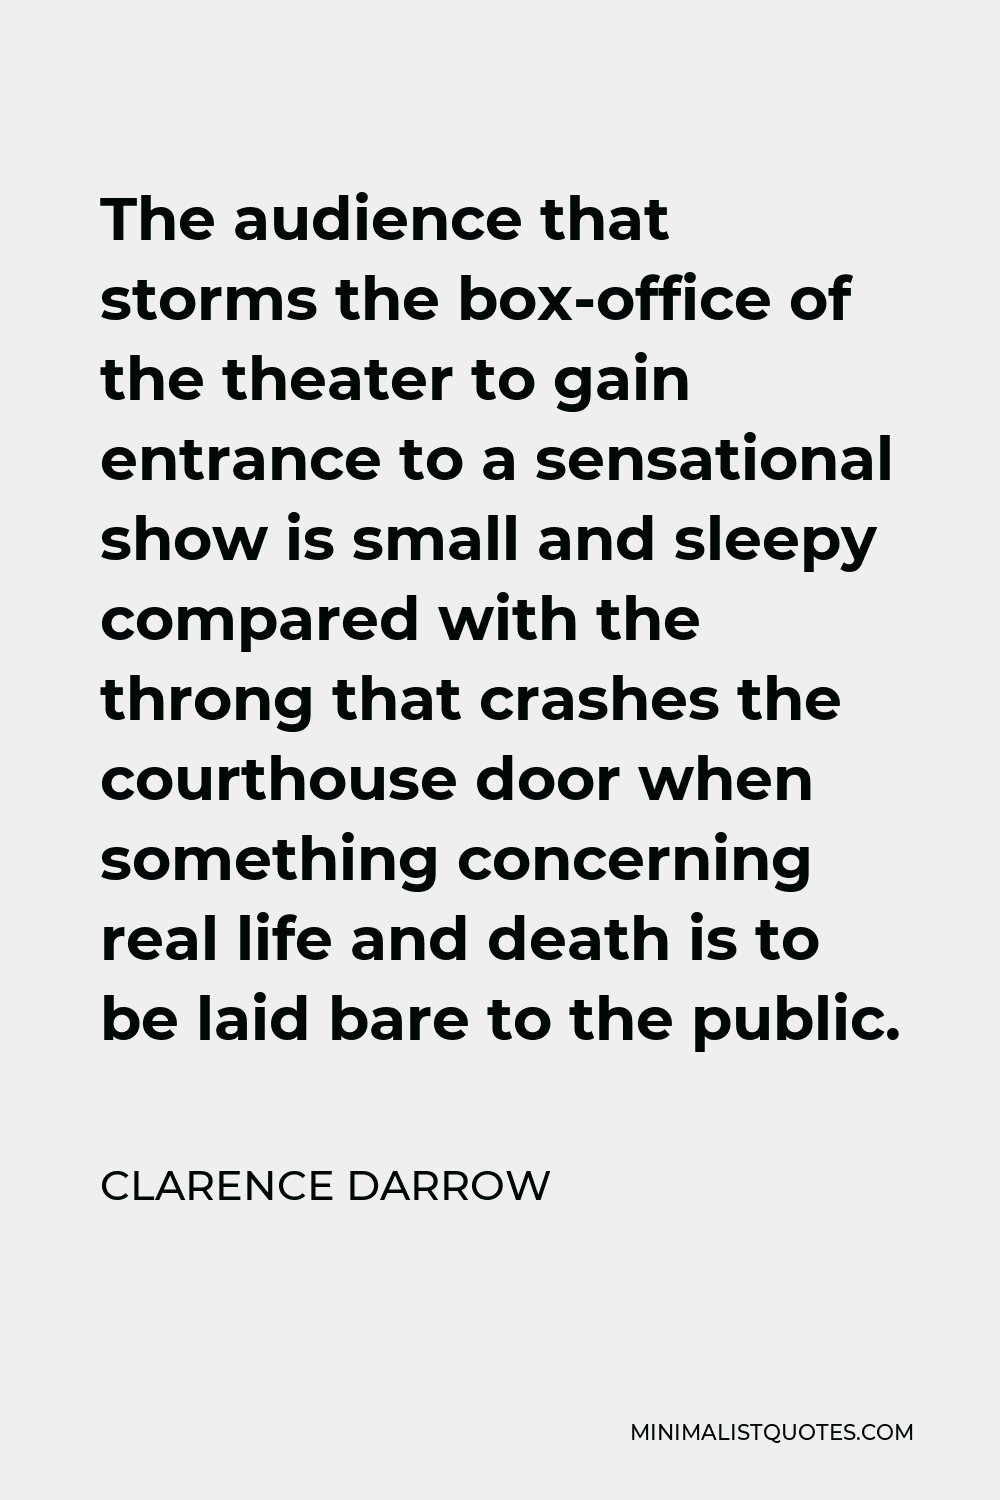 Clarence Darrow Quote - The audience that storms the box-office of the theater to gain entrance to a sensational show is small and sleepy compared with the throng that crashes the courthouse door when something concerning real life and death is to be laid bare to the public.